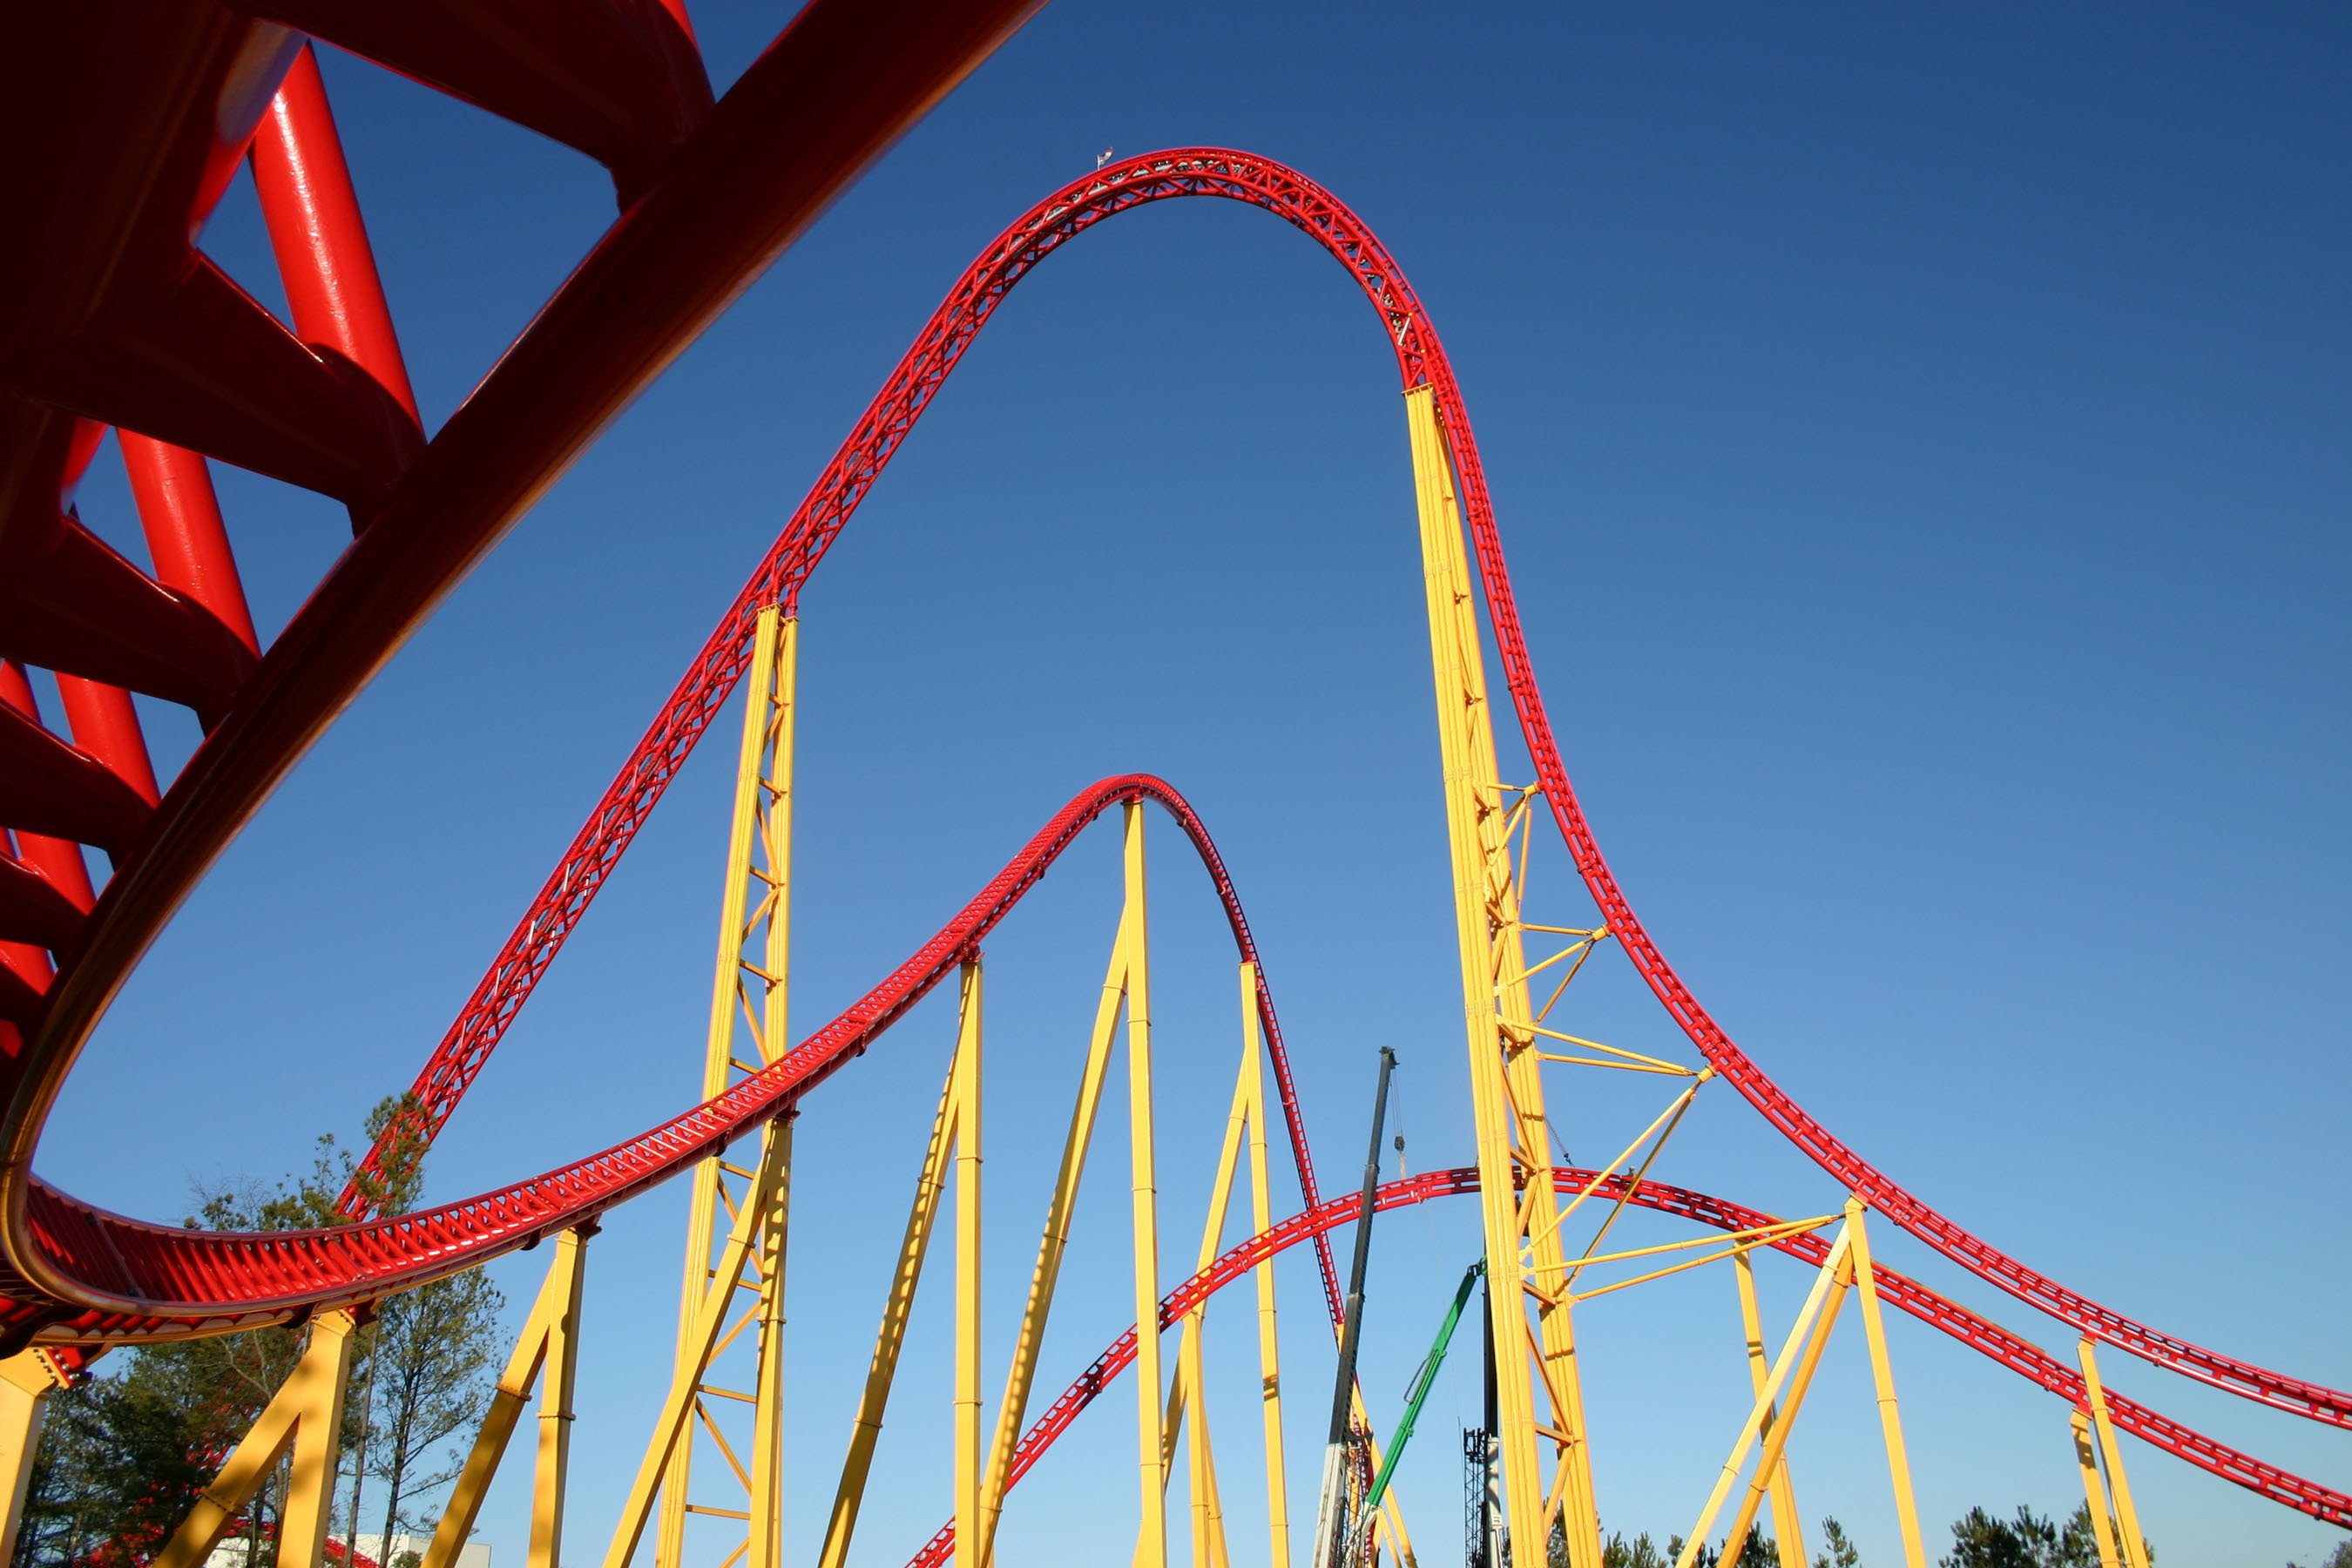 World's best roller coasters - Photo 1 - Pictures - CBS News